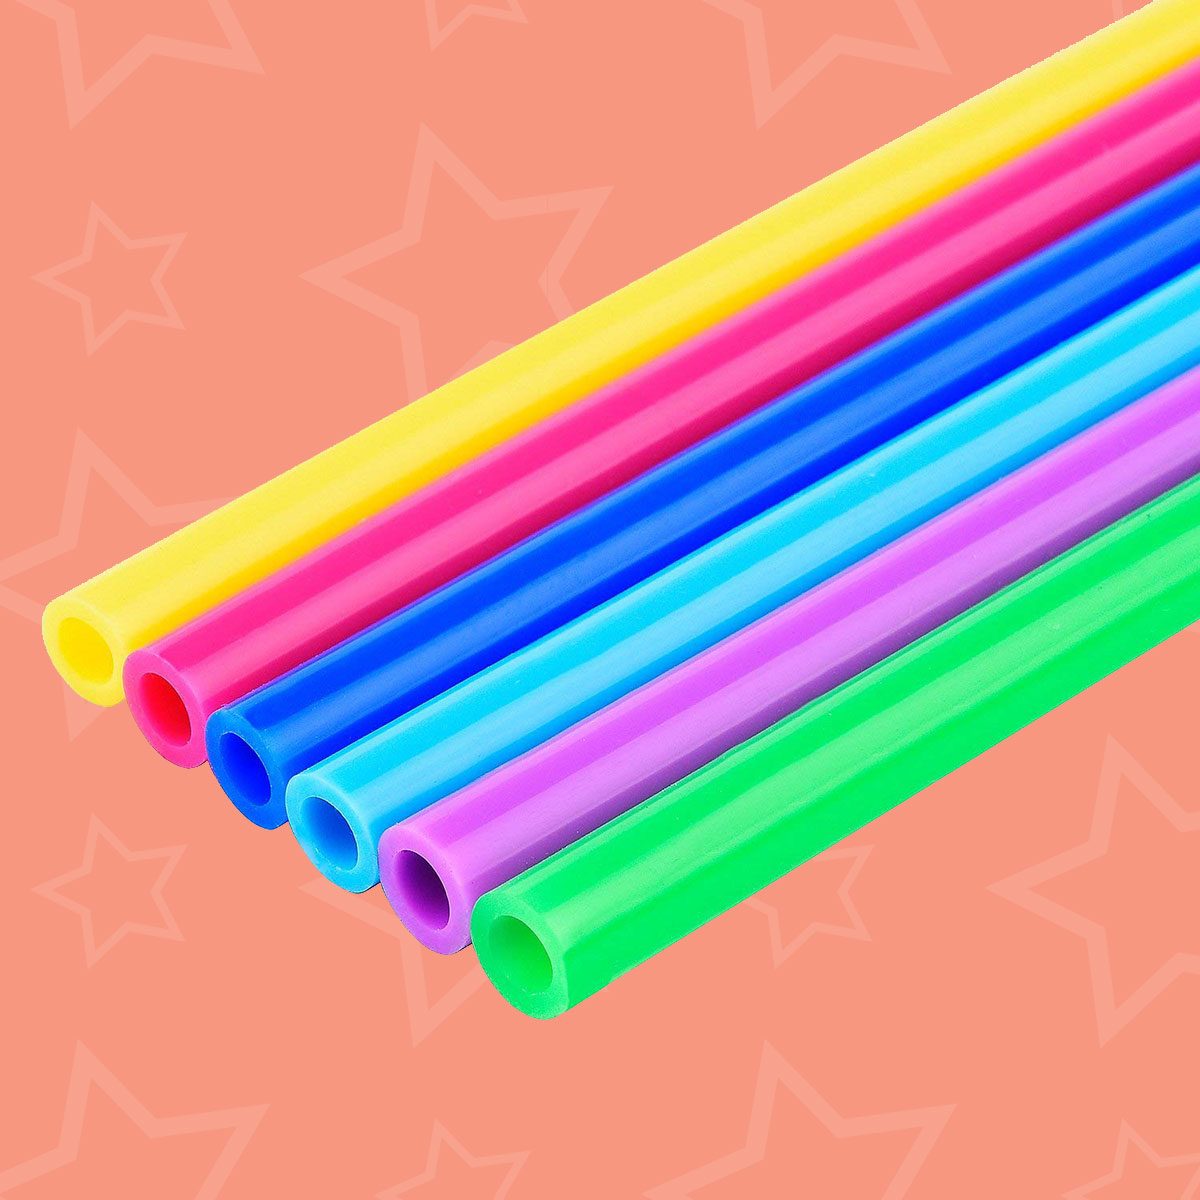 https://www.tasteofhome.com/wp-content/uploads/2018/10/silicone-straws.jpg?fit=700%2C700